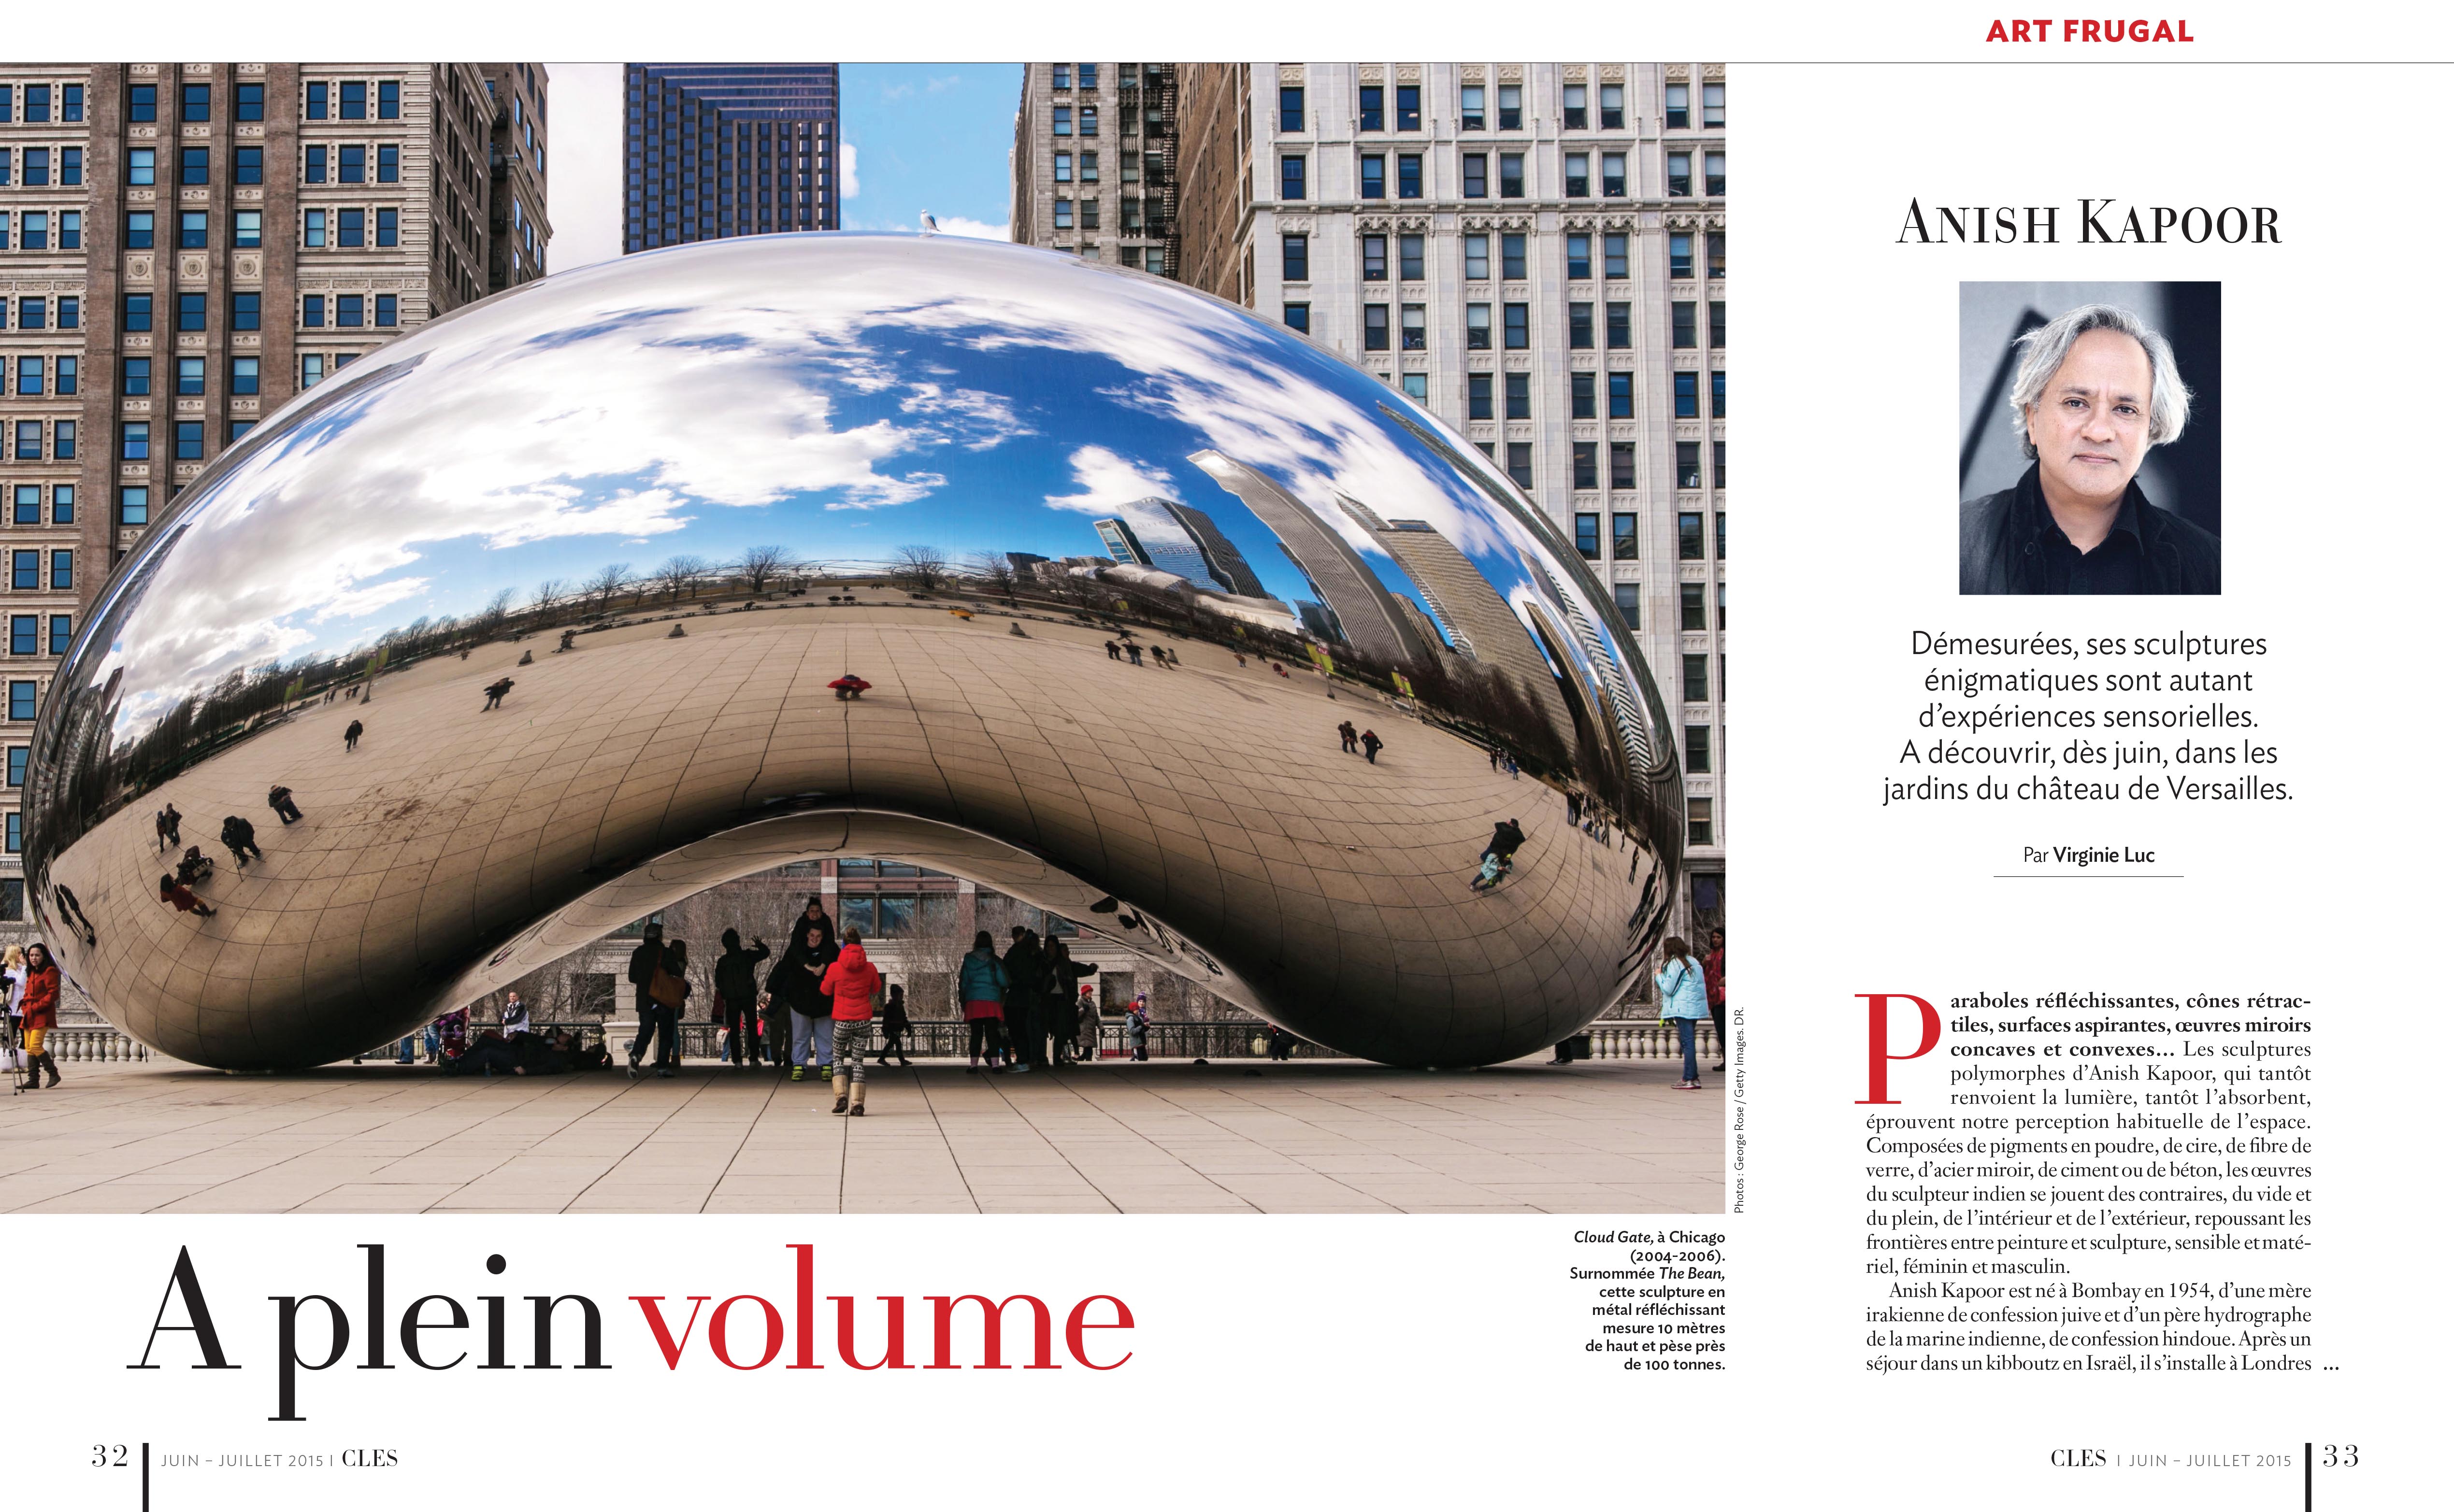 page 1 2_ART_FRUGAL_ANISH_KAPOOR-1